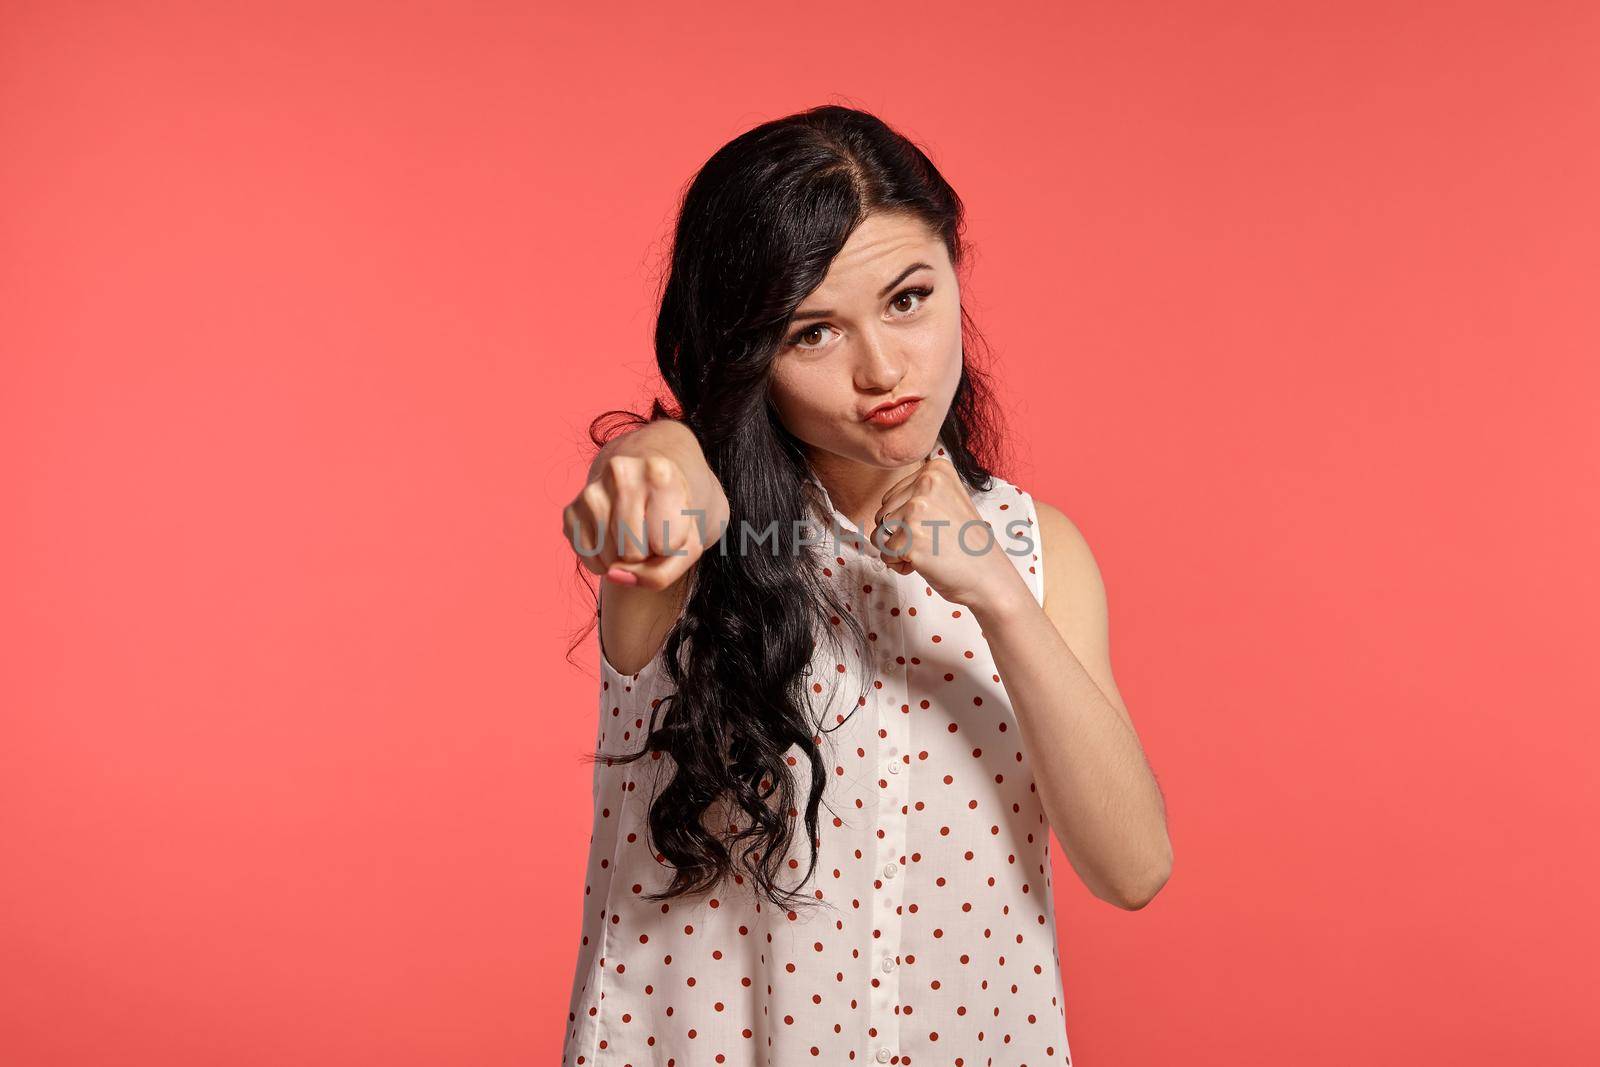 Studio shot of a magnificent teen lady wearing casual white polka dot blouse. Little brunette female is boxing posing over a pink background. People and sincere emotions.